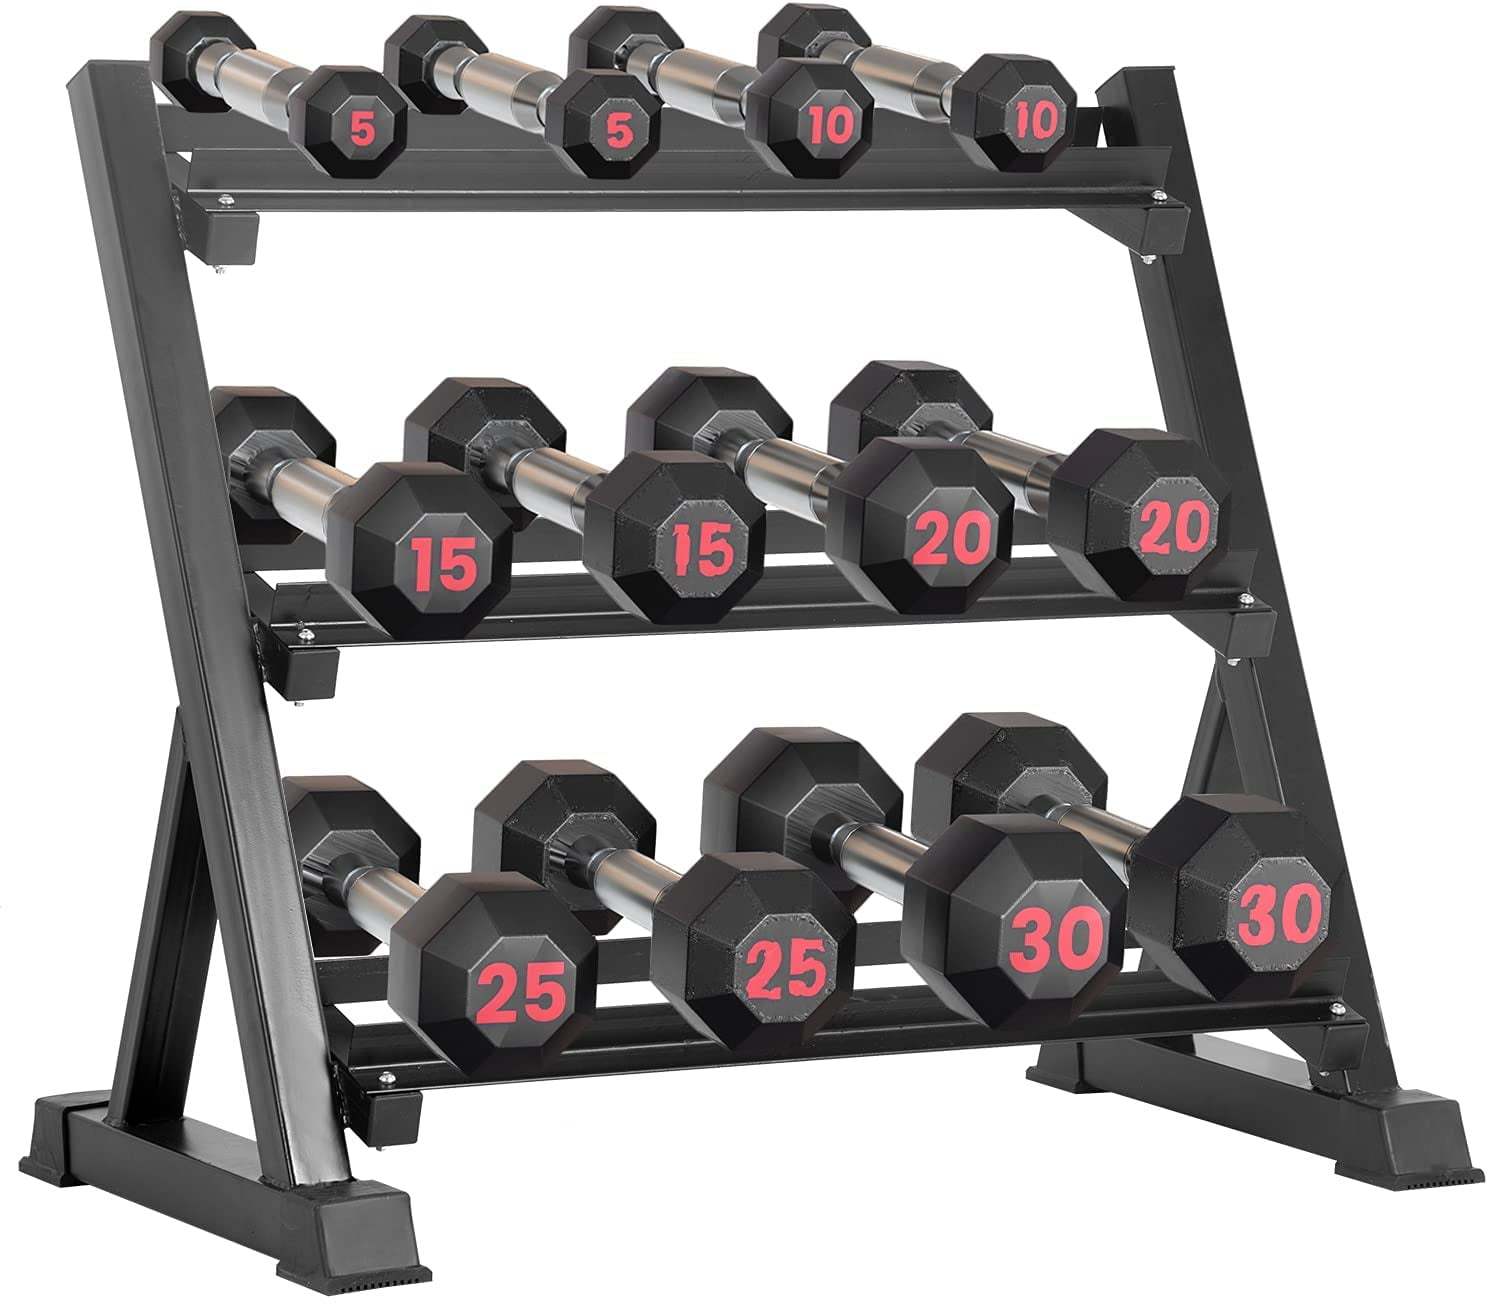 Three-tier Fitness Dumbbell Weight Storage Stand/Holder/Rack for Gym Dumbells 